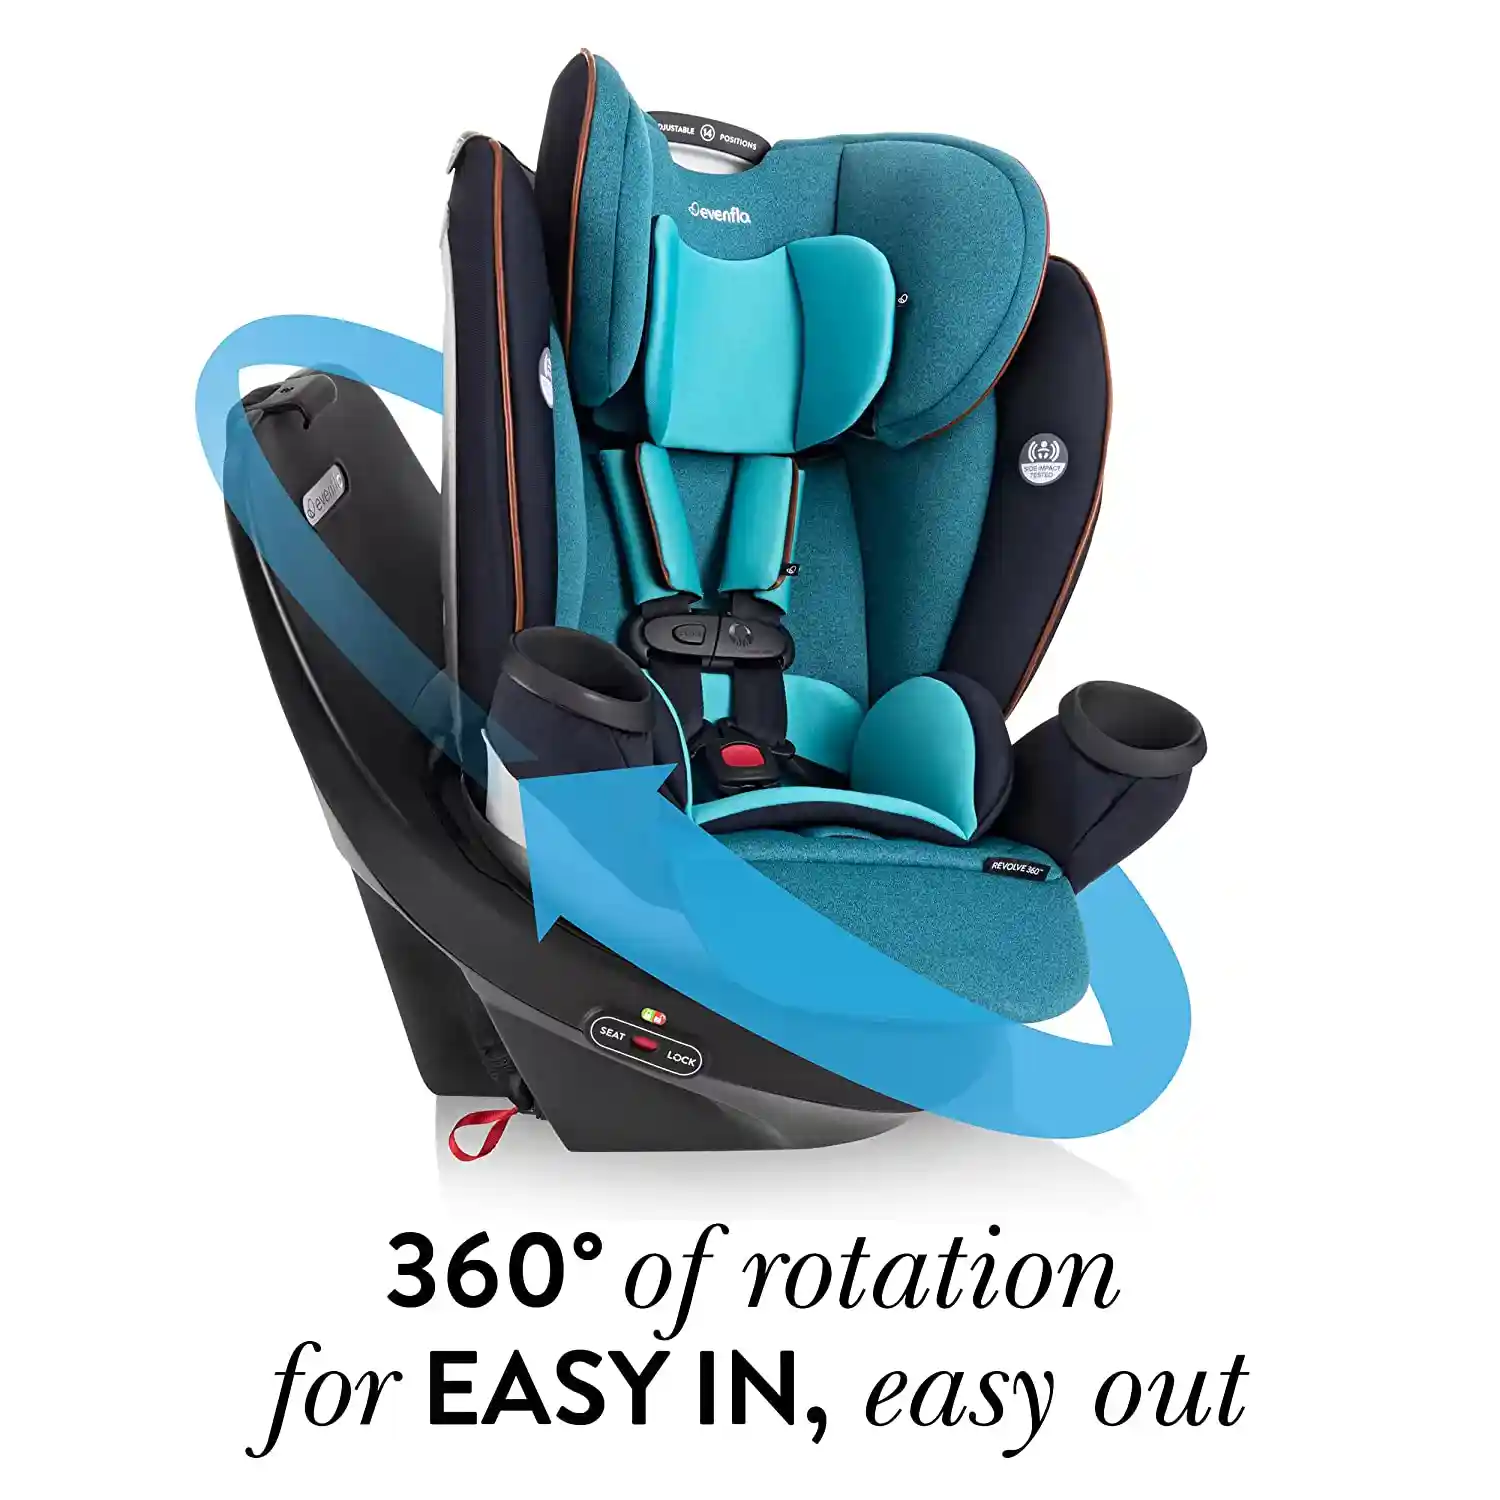 Evenflo Gold Revolve360 Rotational All-in-1 Convertible Car Seat Swivel Car Seat